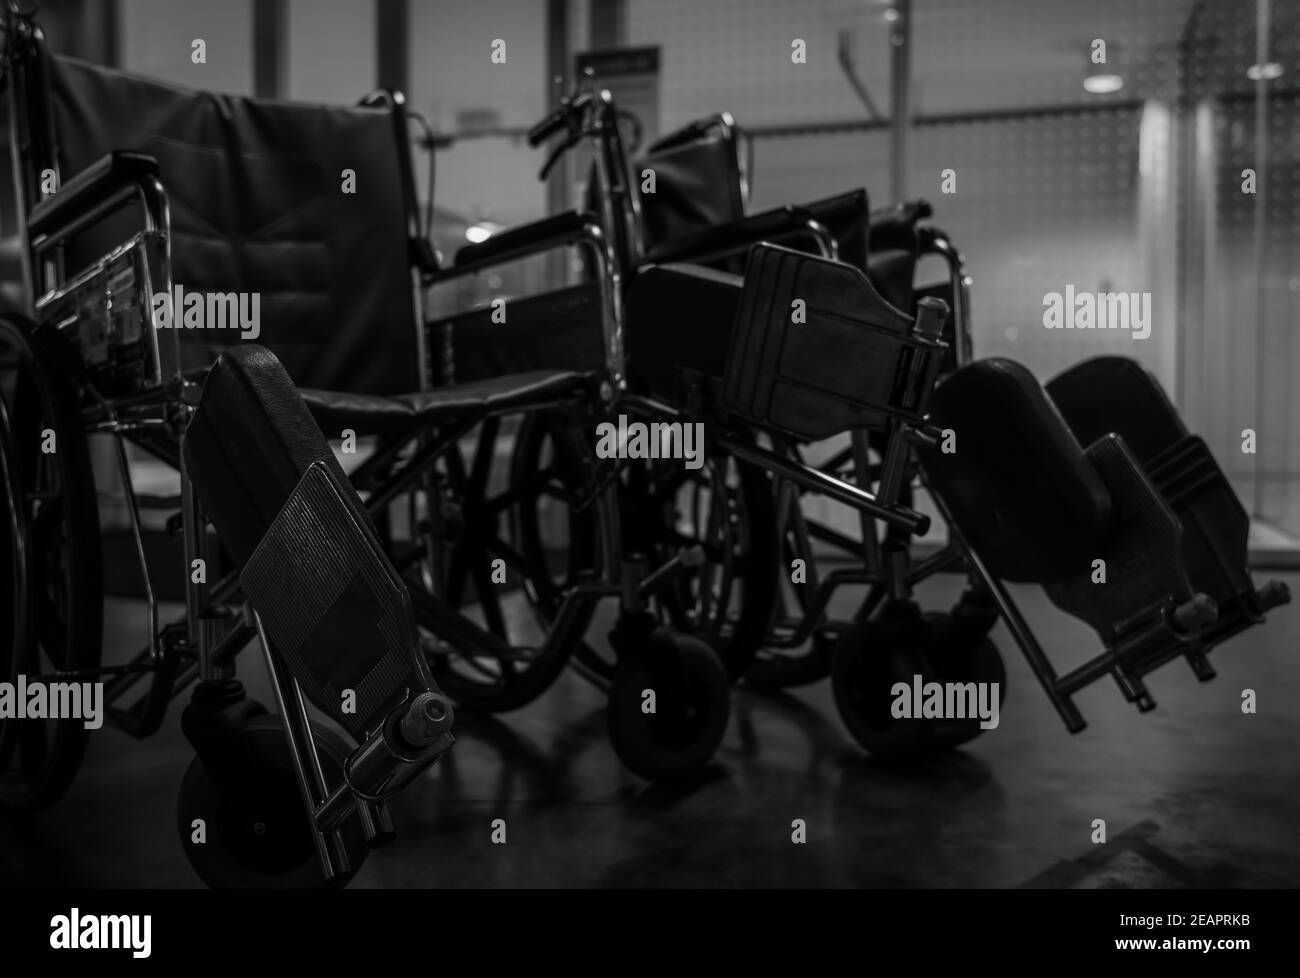 Empty wheelchair in hospital at night for service patient and disabled people. Medical equipment in hospital for assistance handicapped old people. Chair with wheels for patient care in nursing home. Stock Photo